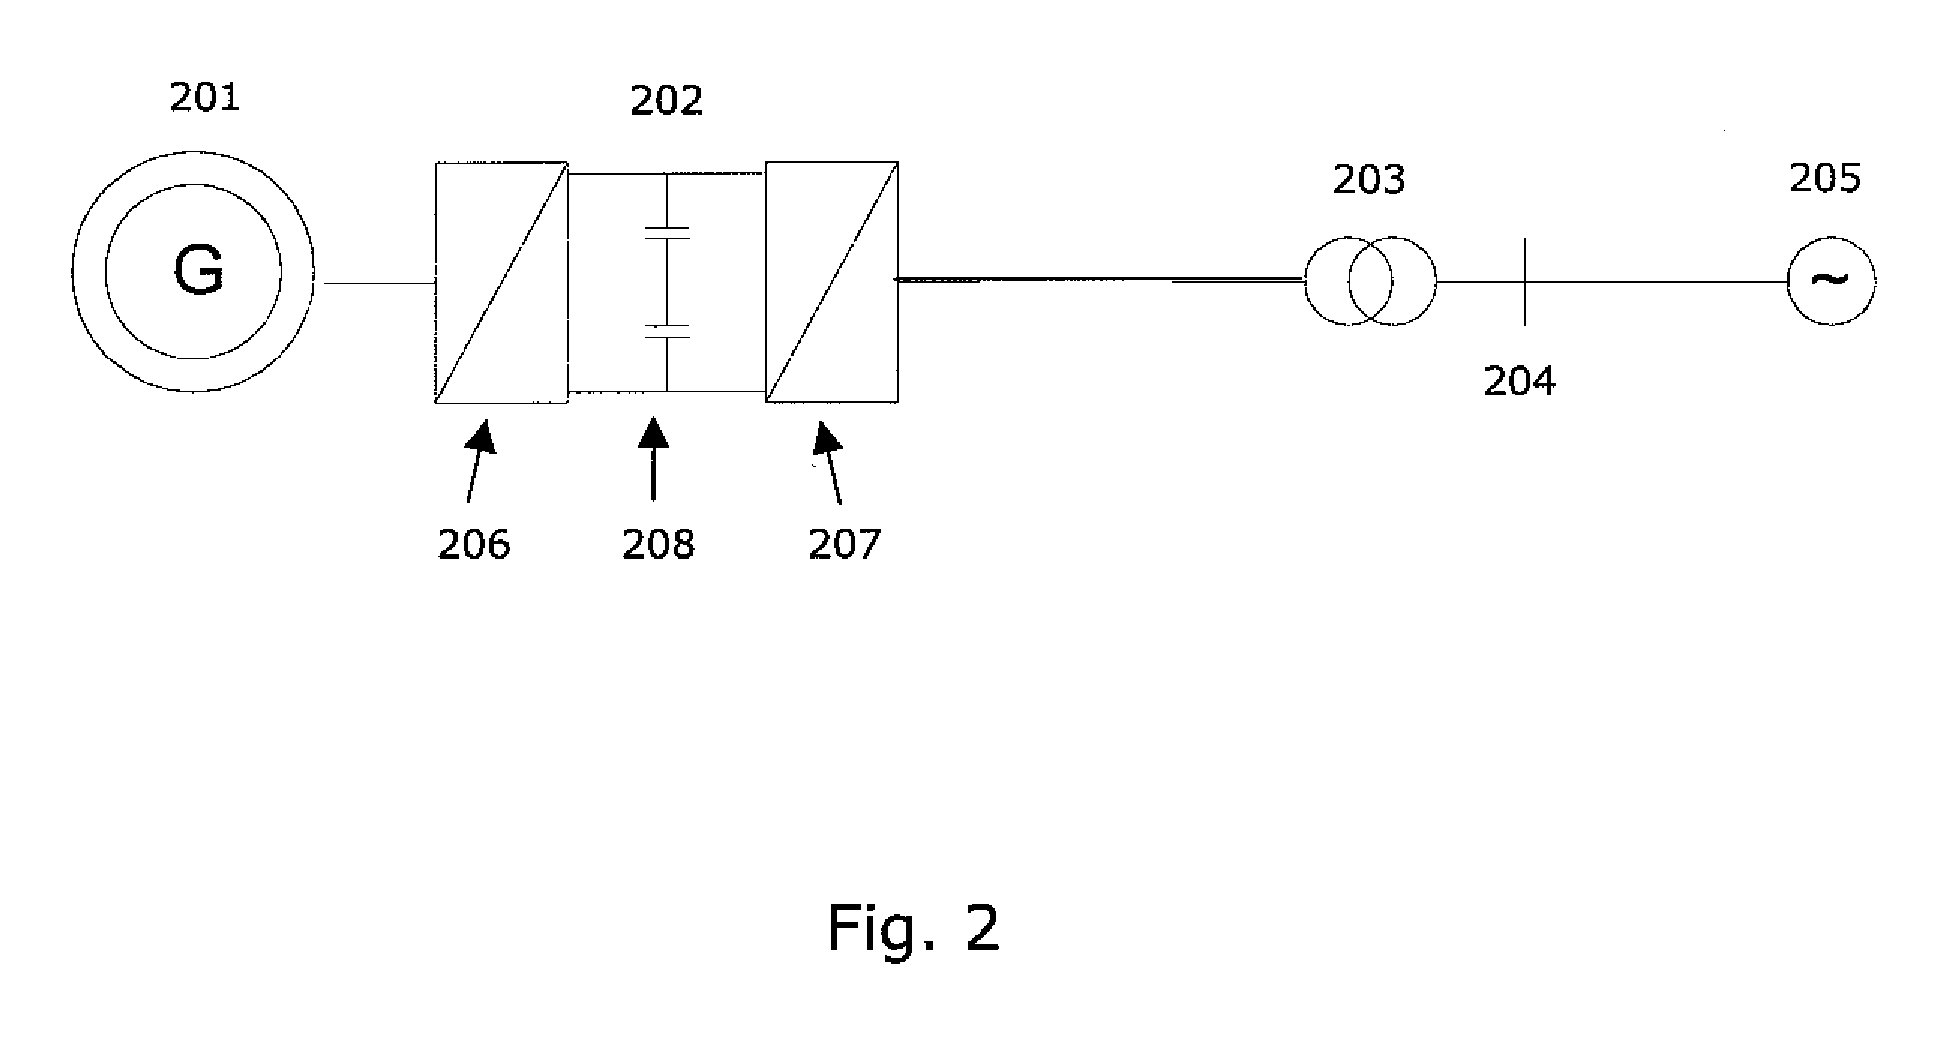 Low-Voltage Harmonic Filter for Full-Scale Converter Systems